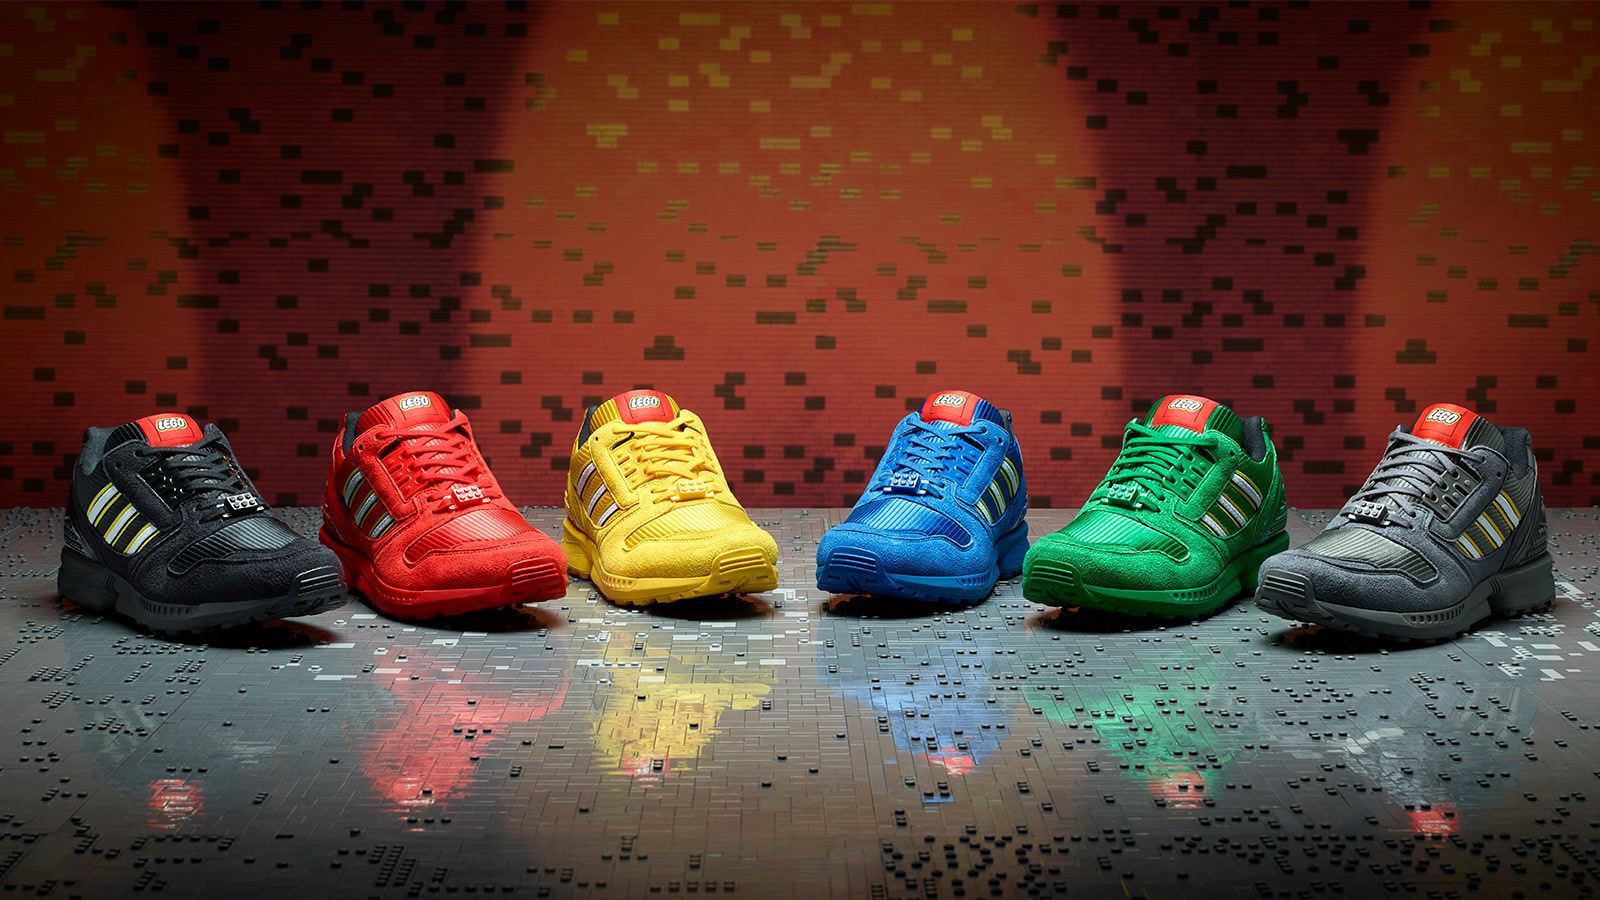 adidas And LEGO Announce The ZX 8000 'Bricks' Collection - IMBOLDN